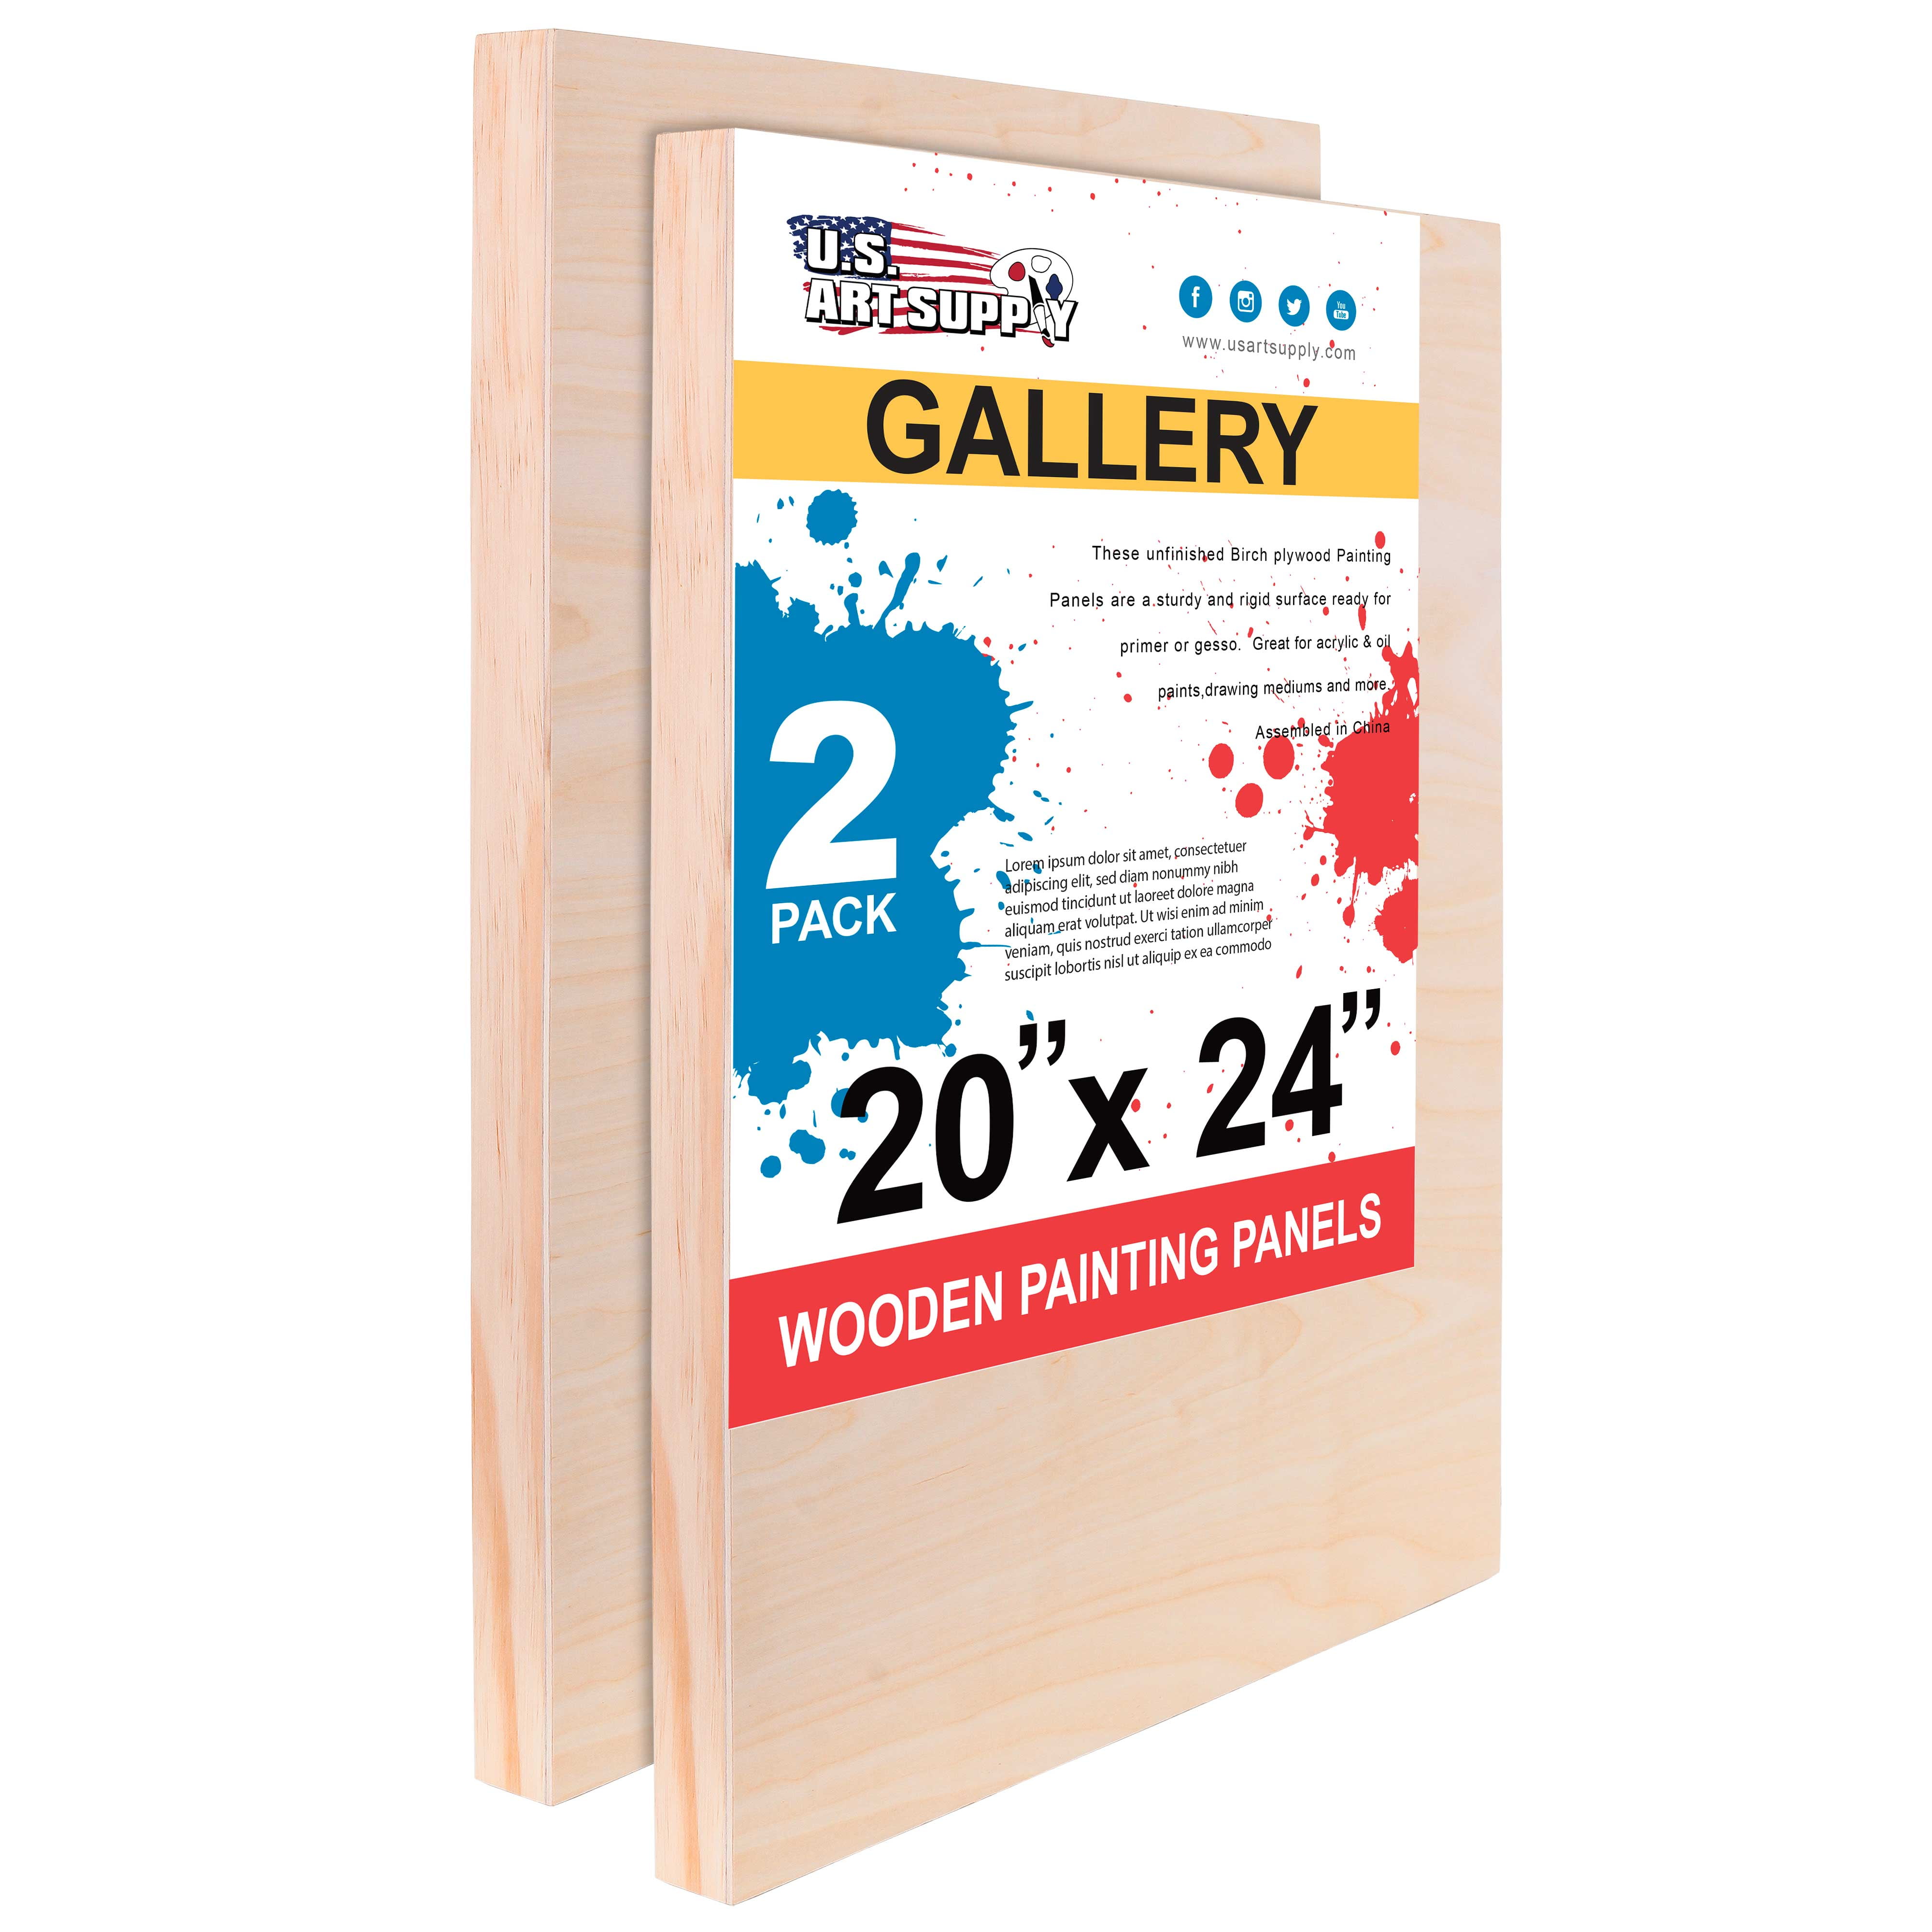 Gallery 1-1/2 Deep Cradle U.S Acrylic - Artist Depth Wooden Wall Canvases Oil Art Supply 36 x 36 Birch Wood Paint Pouring Panel Boards Encaustic Pack of 2 Painting Mixed-Media Craft 